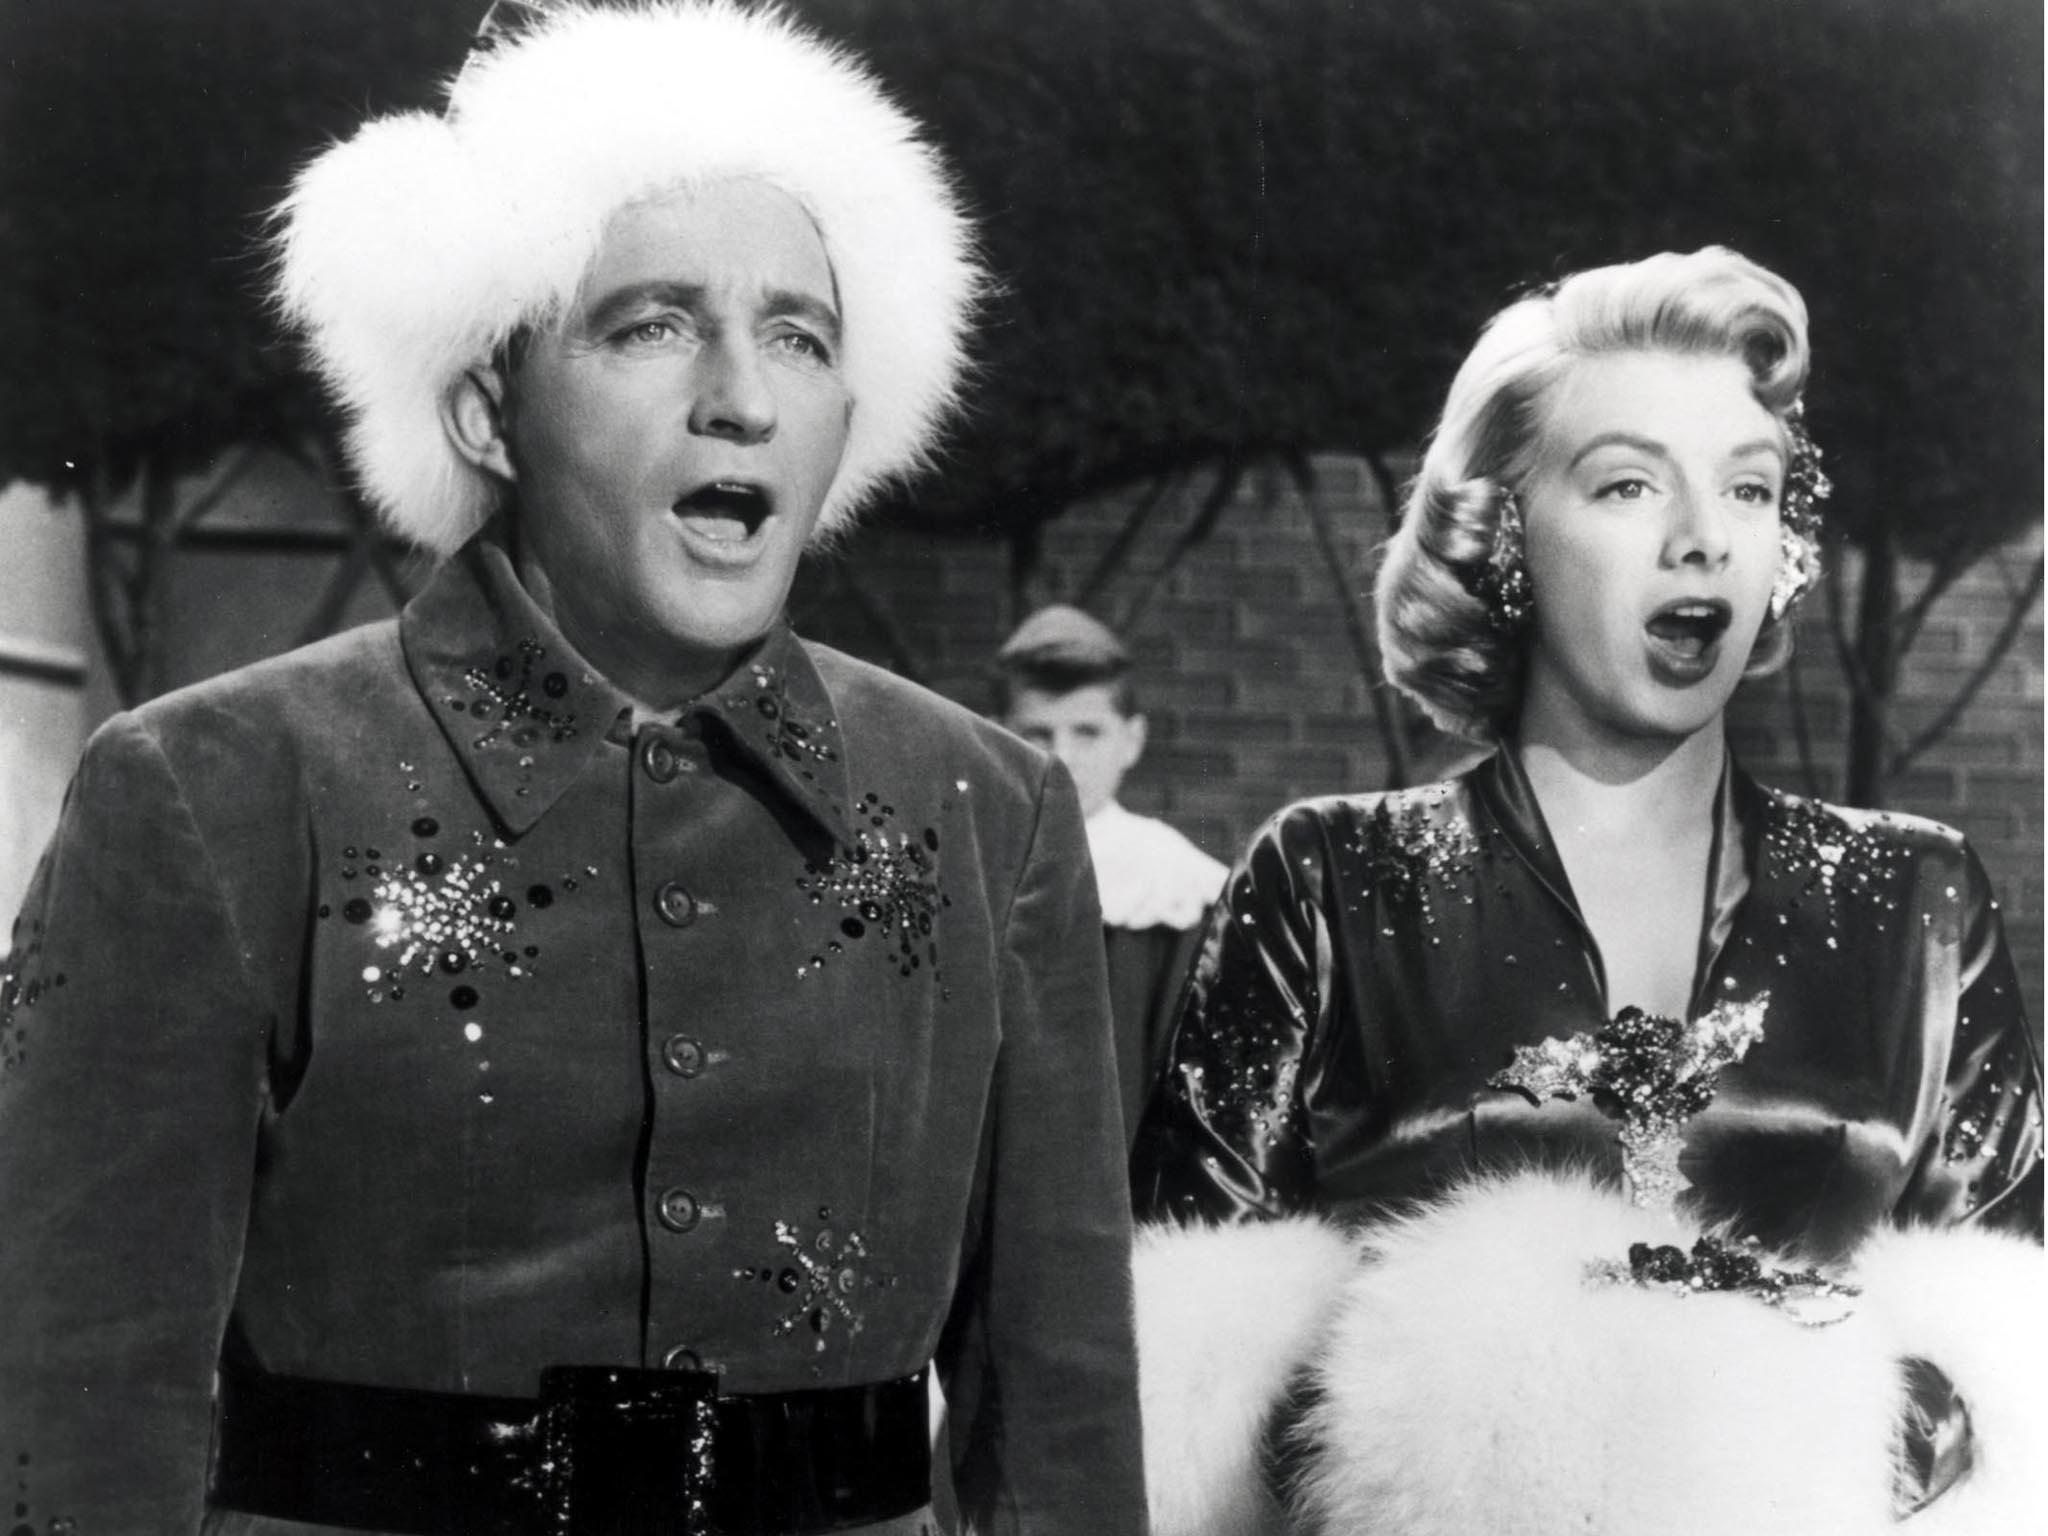 Bing Crosby and Rosemary Clooney starred in the 1954 film ‘White Christmas’